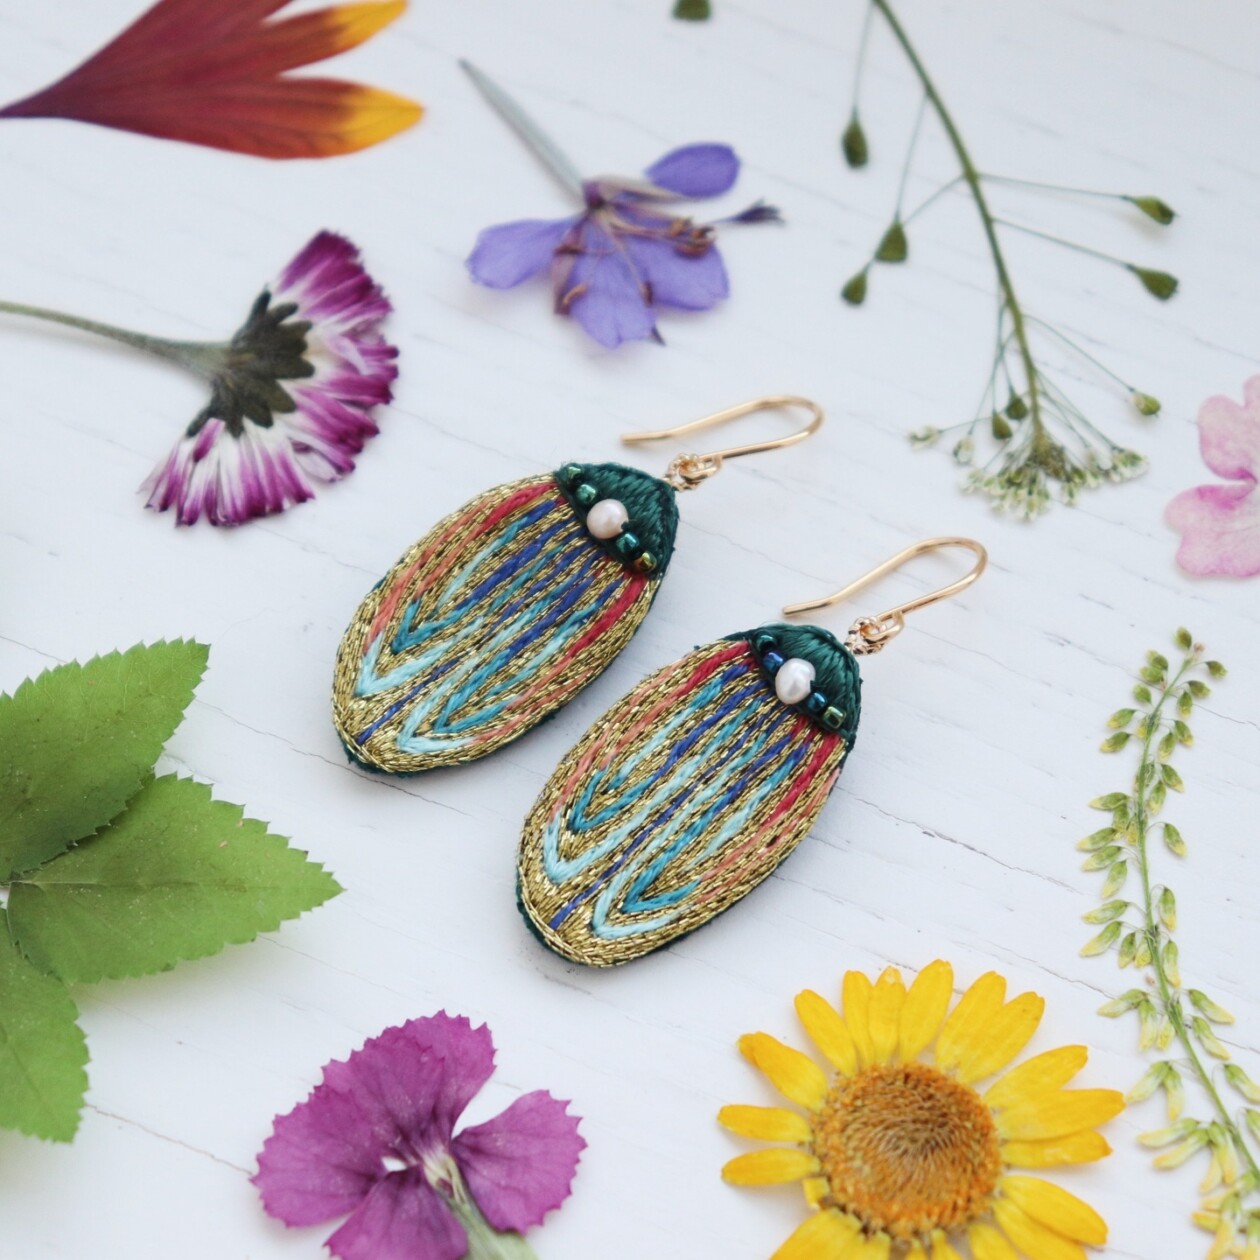 Eye Catching Handmade Embroidered Earrings By Vivaembr (18)